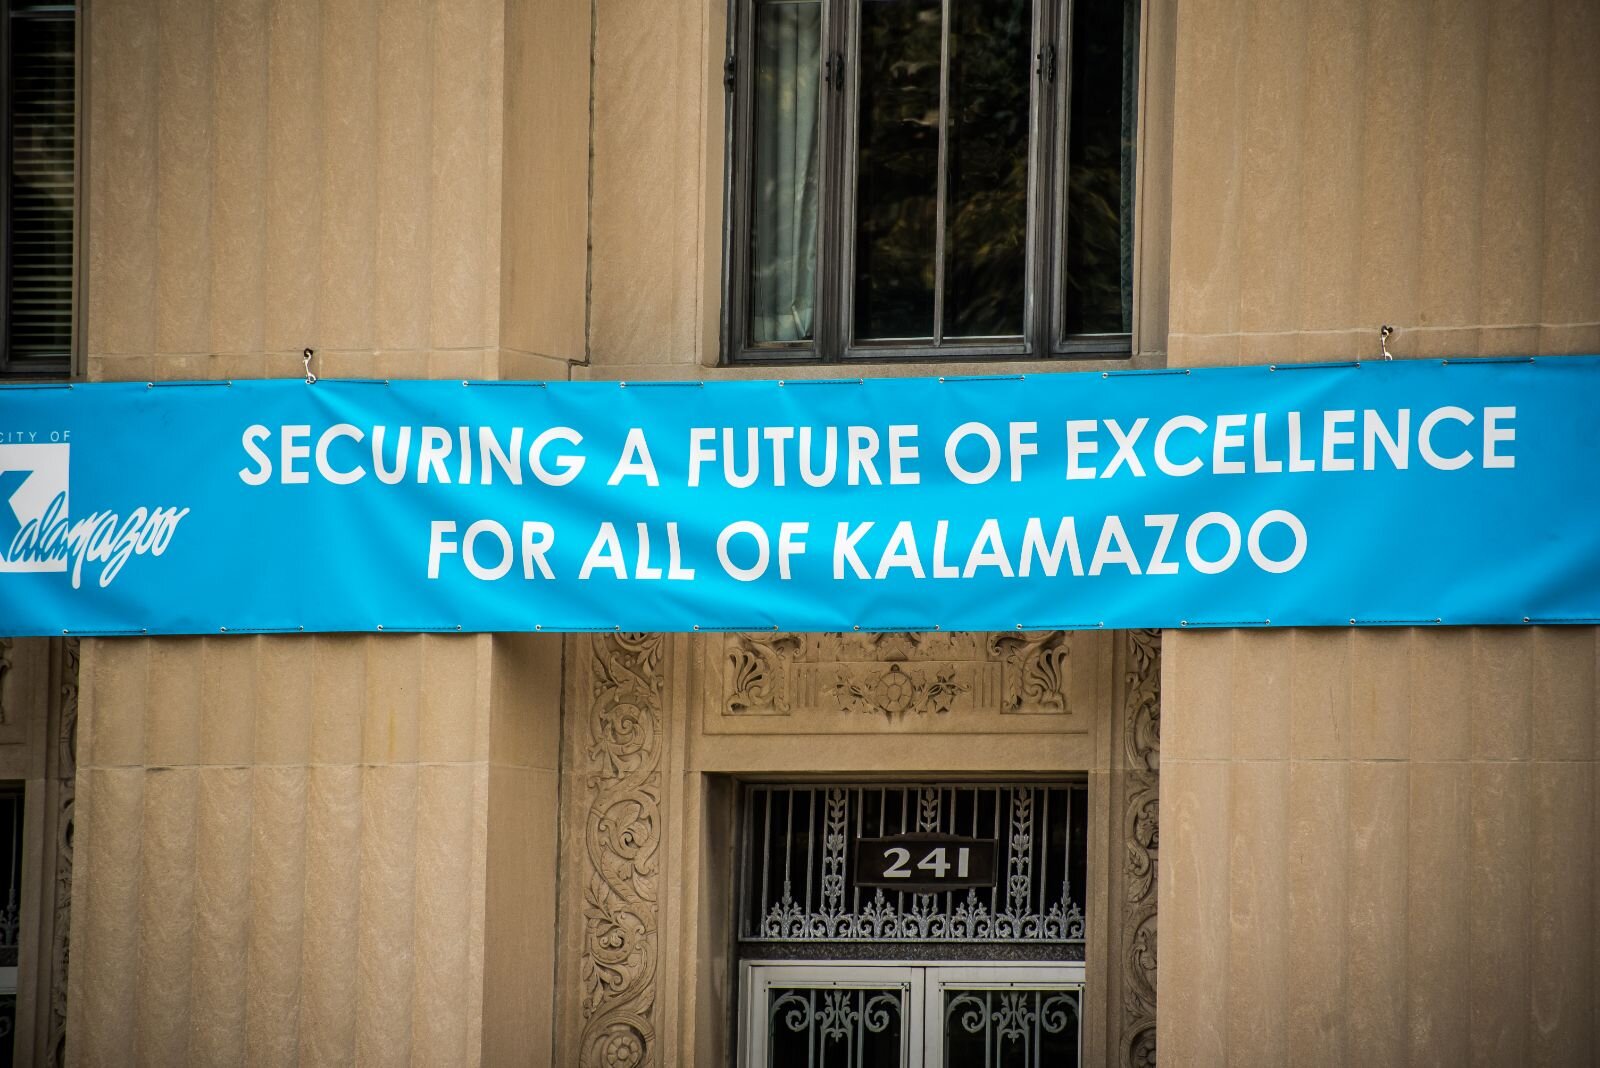 A banner proclaims the significance of a $400 million dollar gift that will go to Kalamazoo’s Fund For Excellence through donations over the next 10 years.